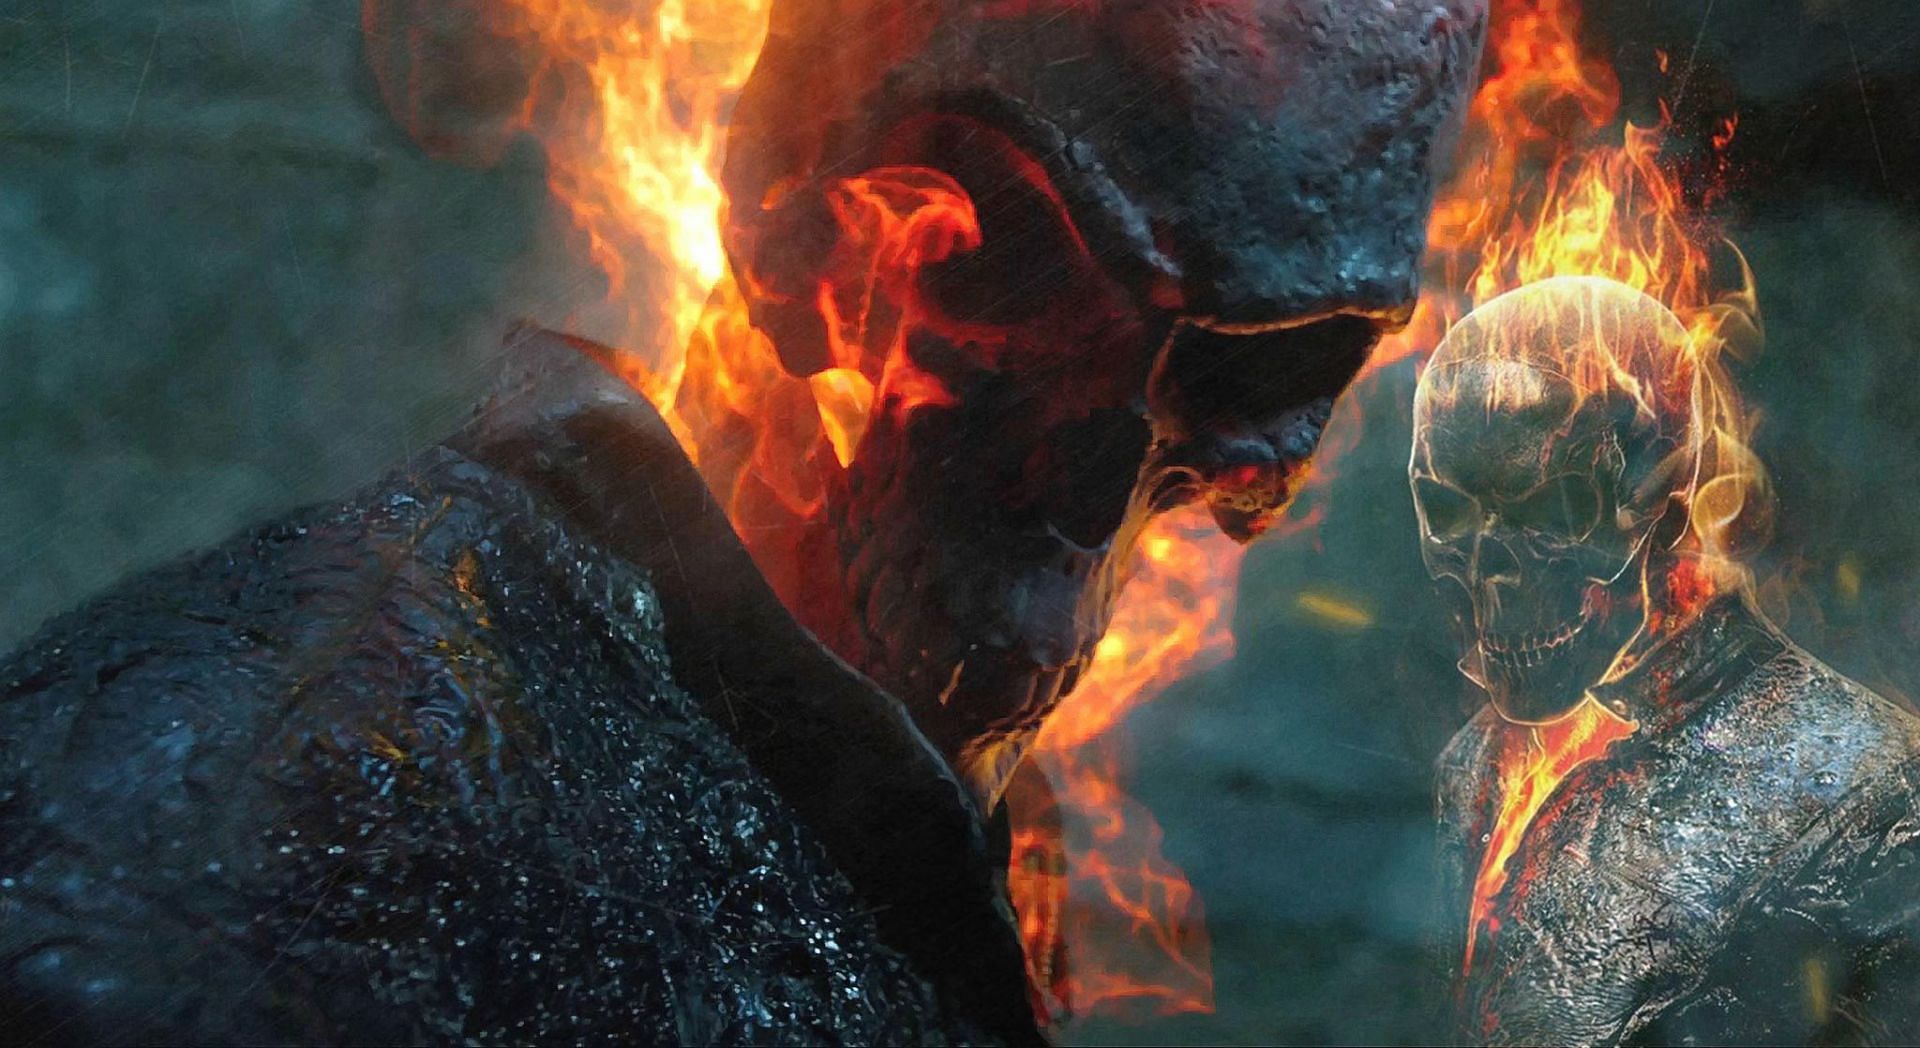 How did Ghost Rider get his powers in the comics? Explained